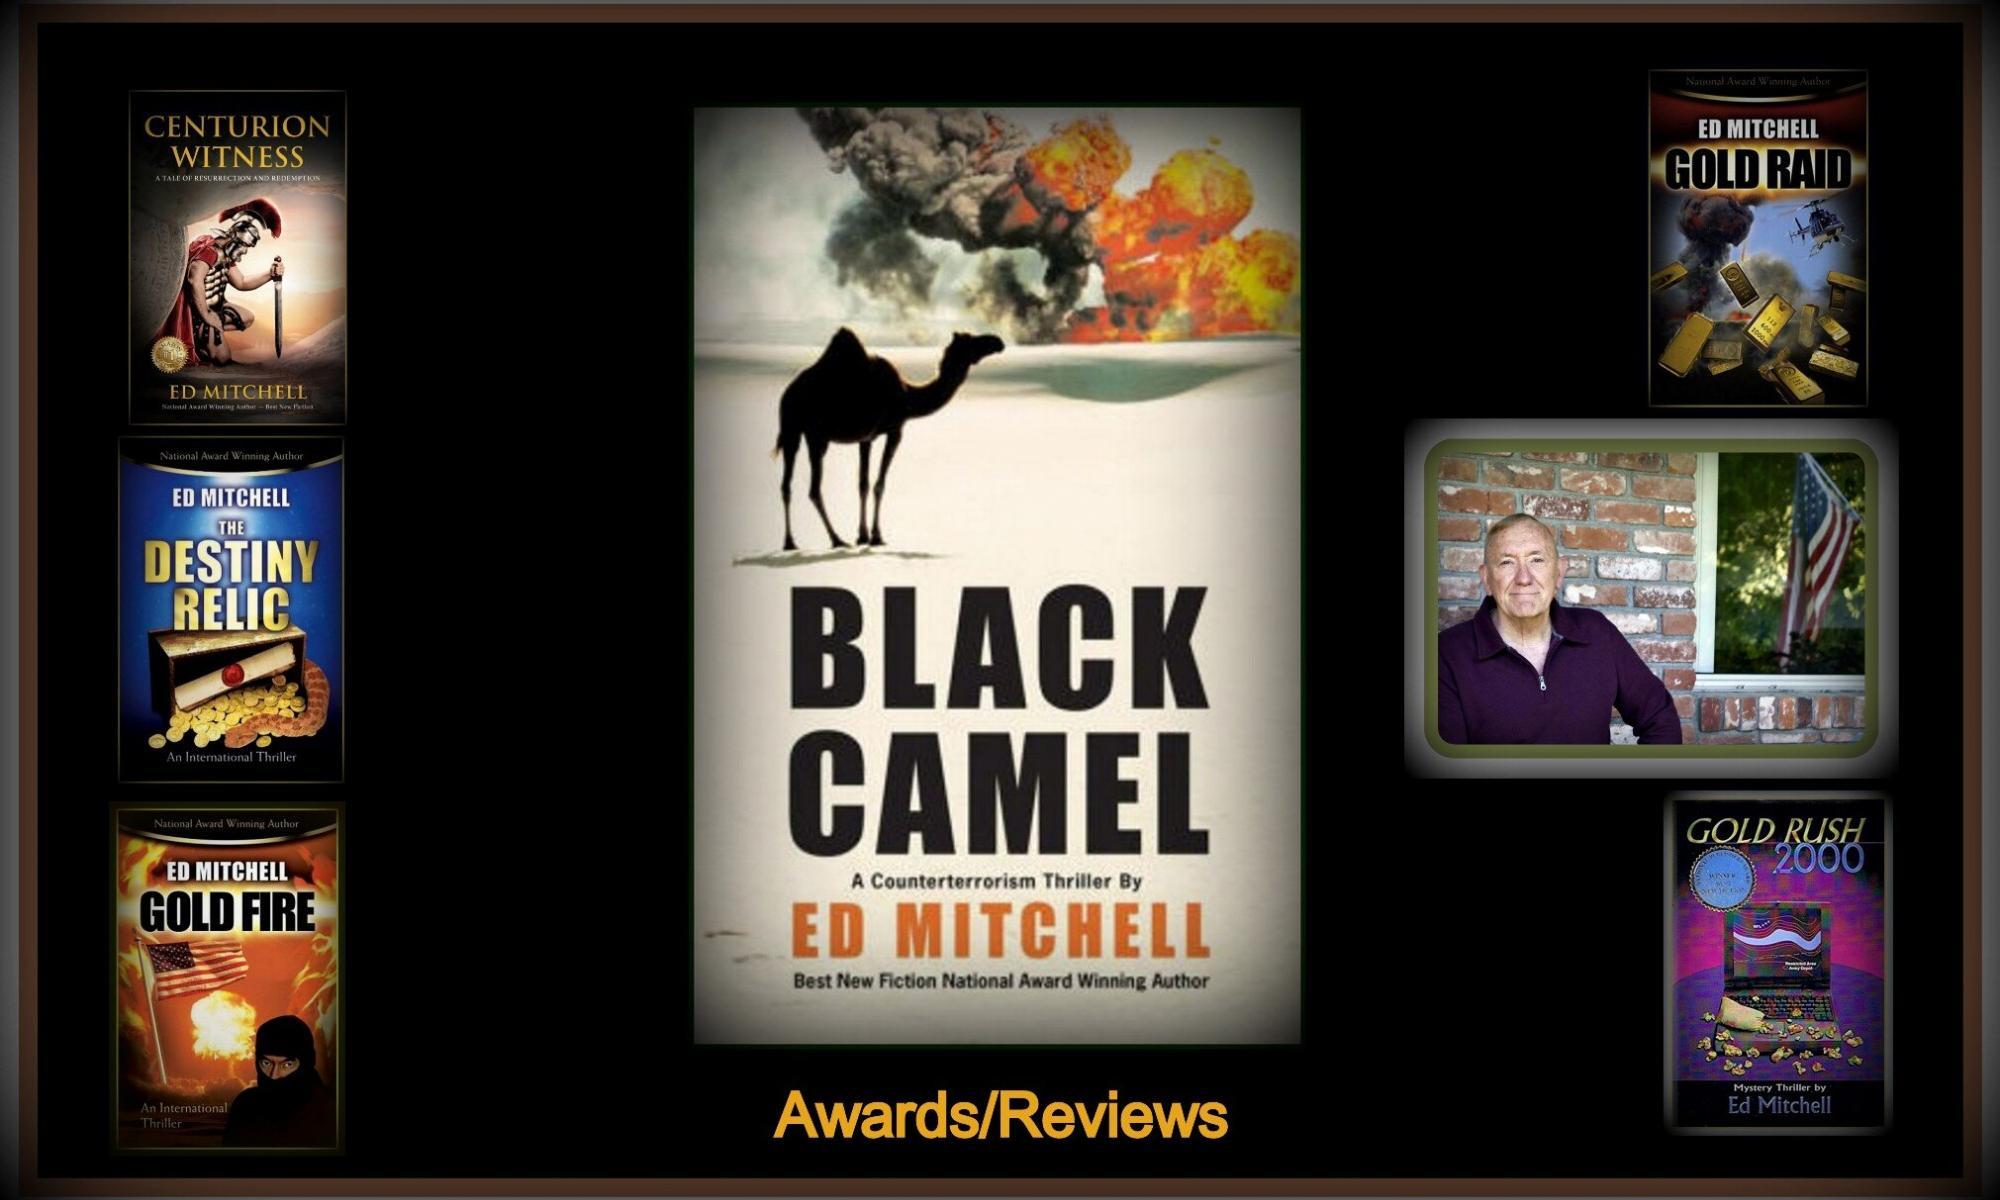 Black Camel book with the author's other publications